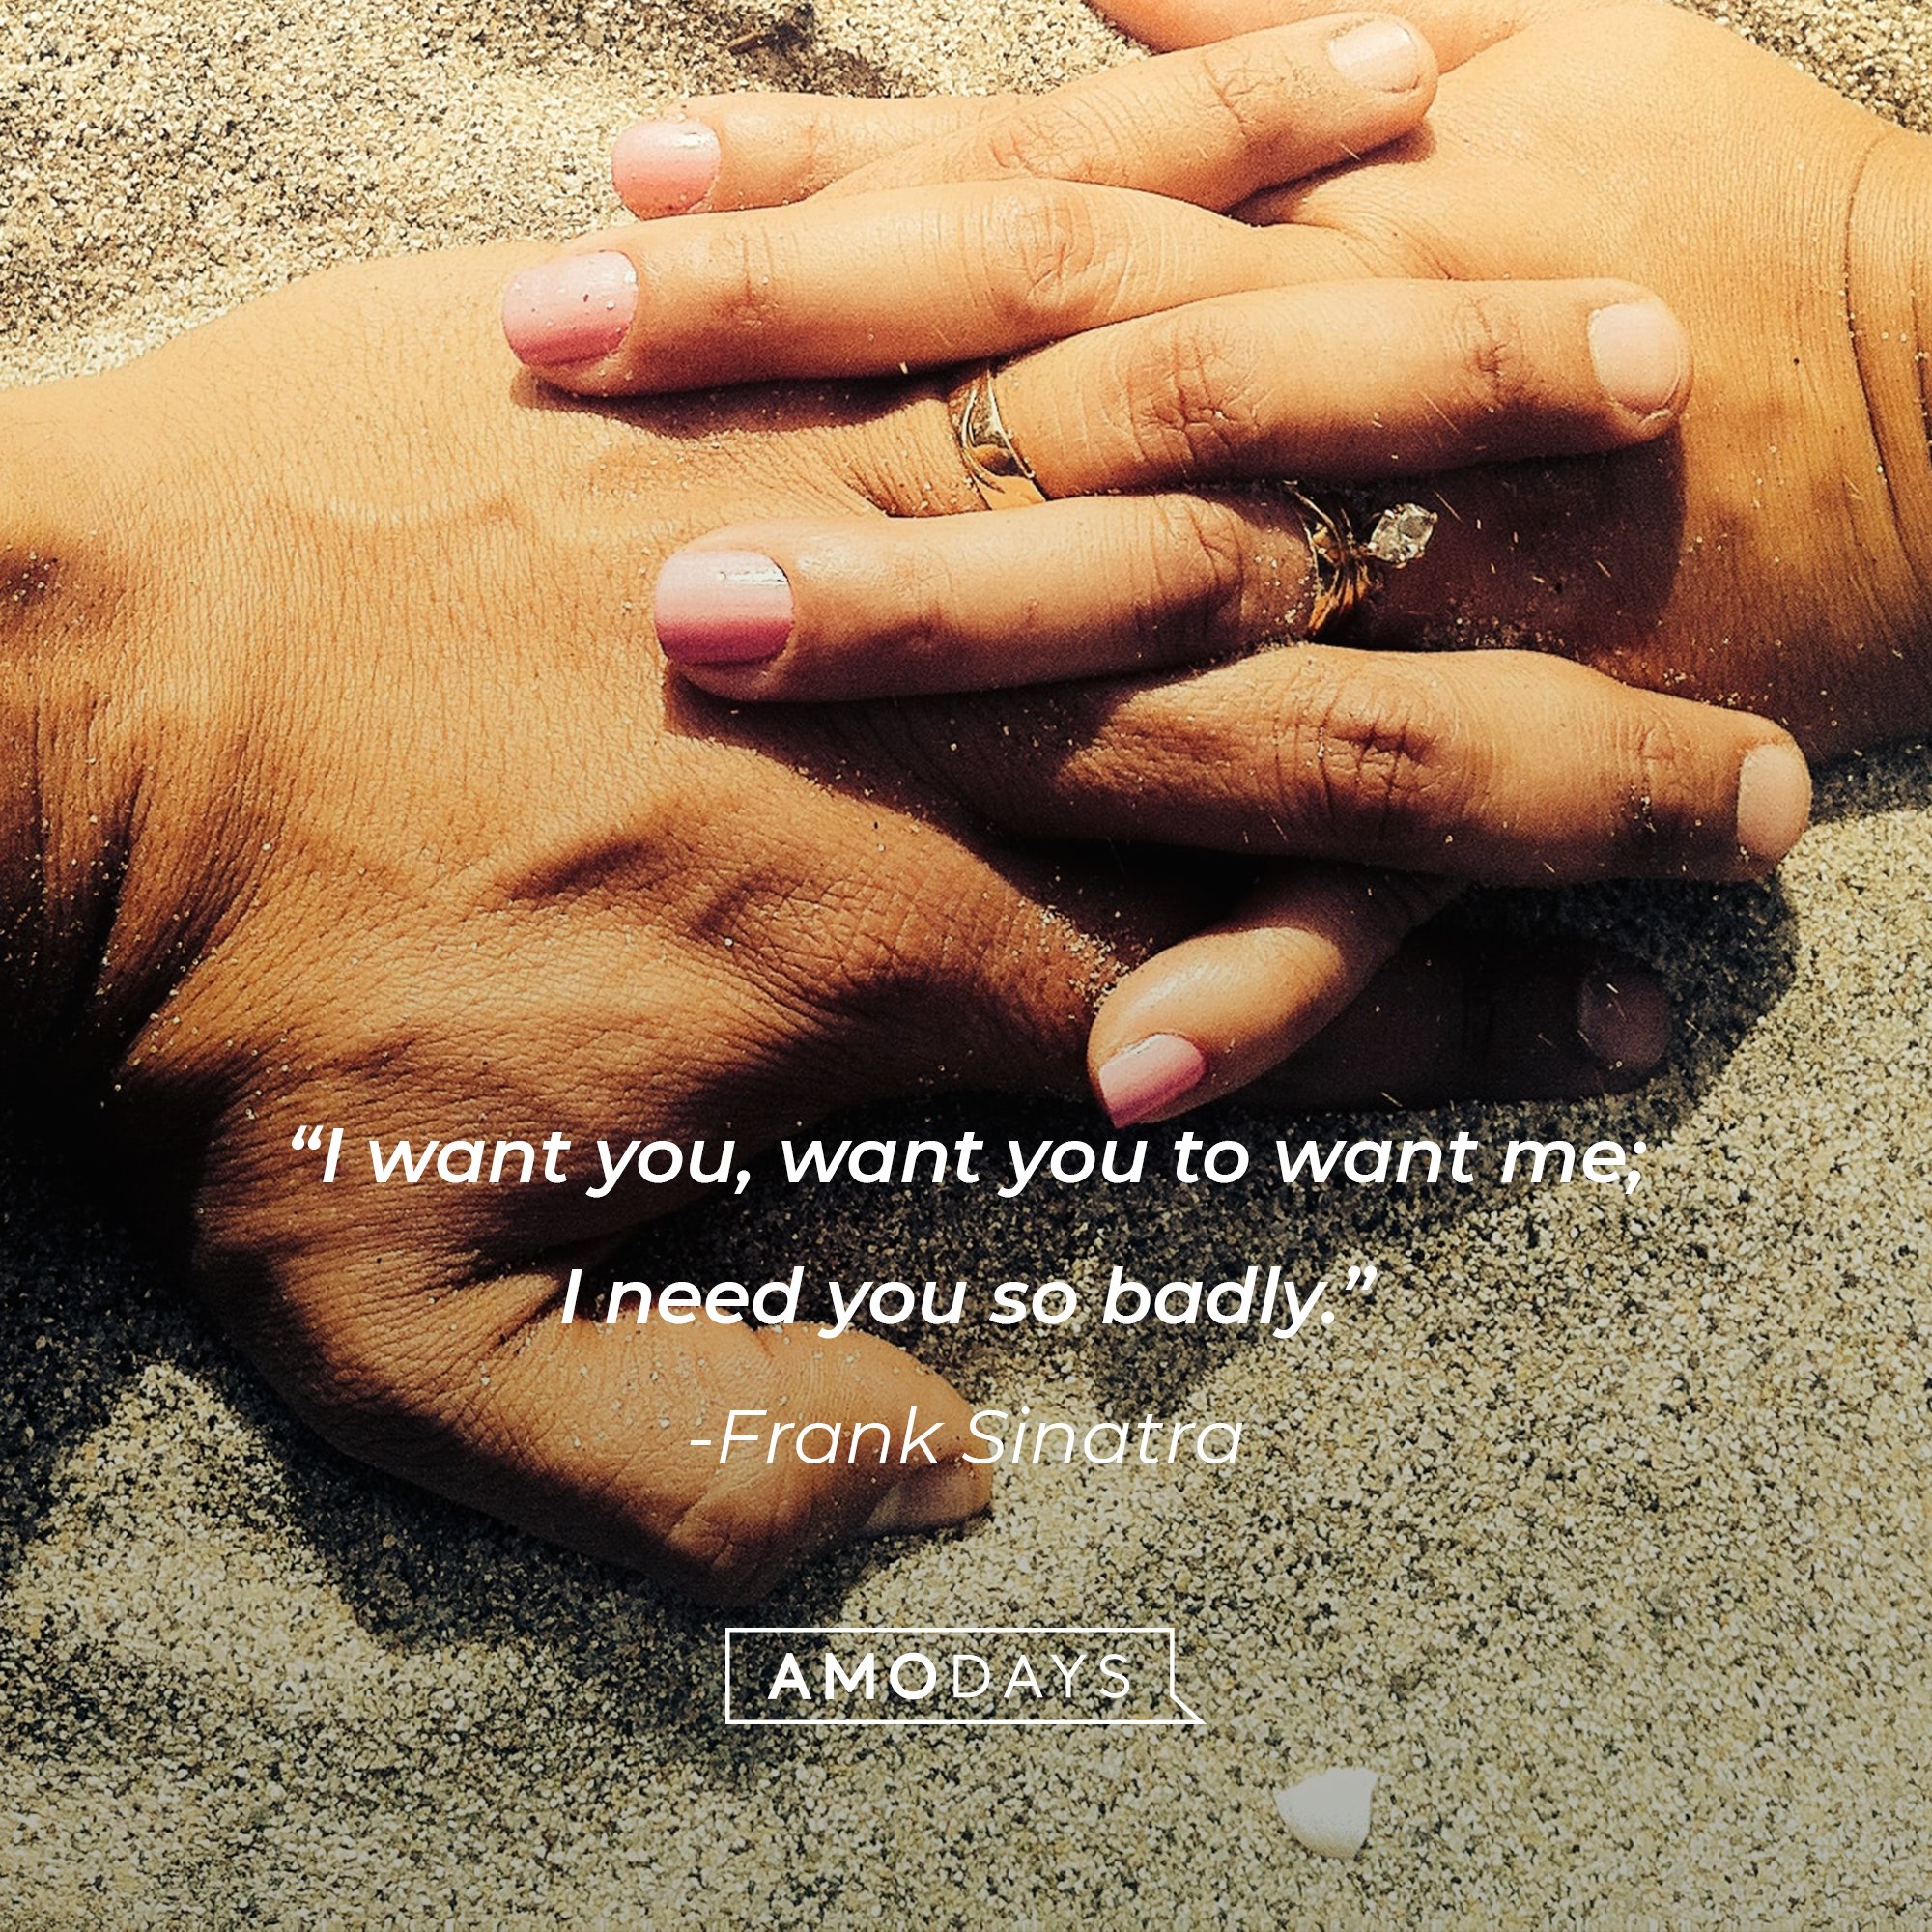 Frank Sinatra’s quote: "I want you, want you to want me; I need you so badly.” | Image: AmoDays